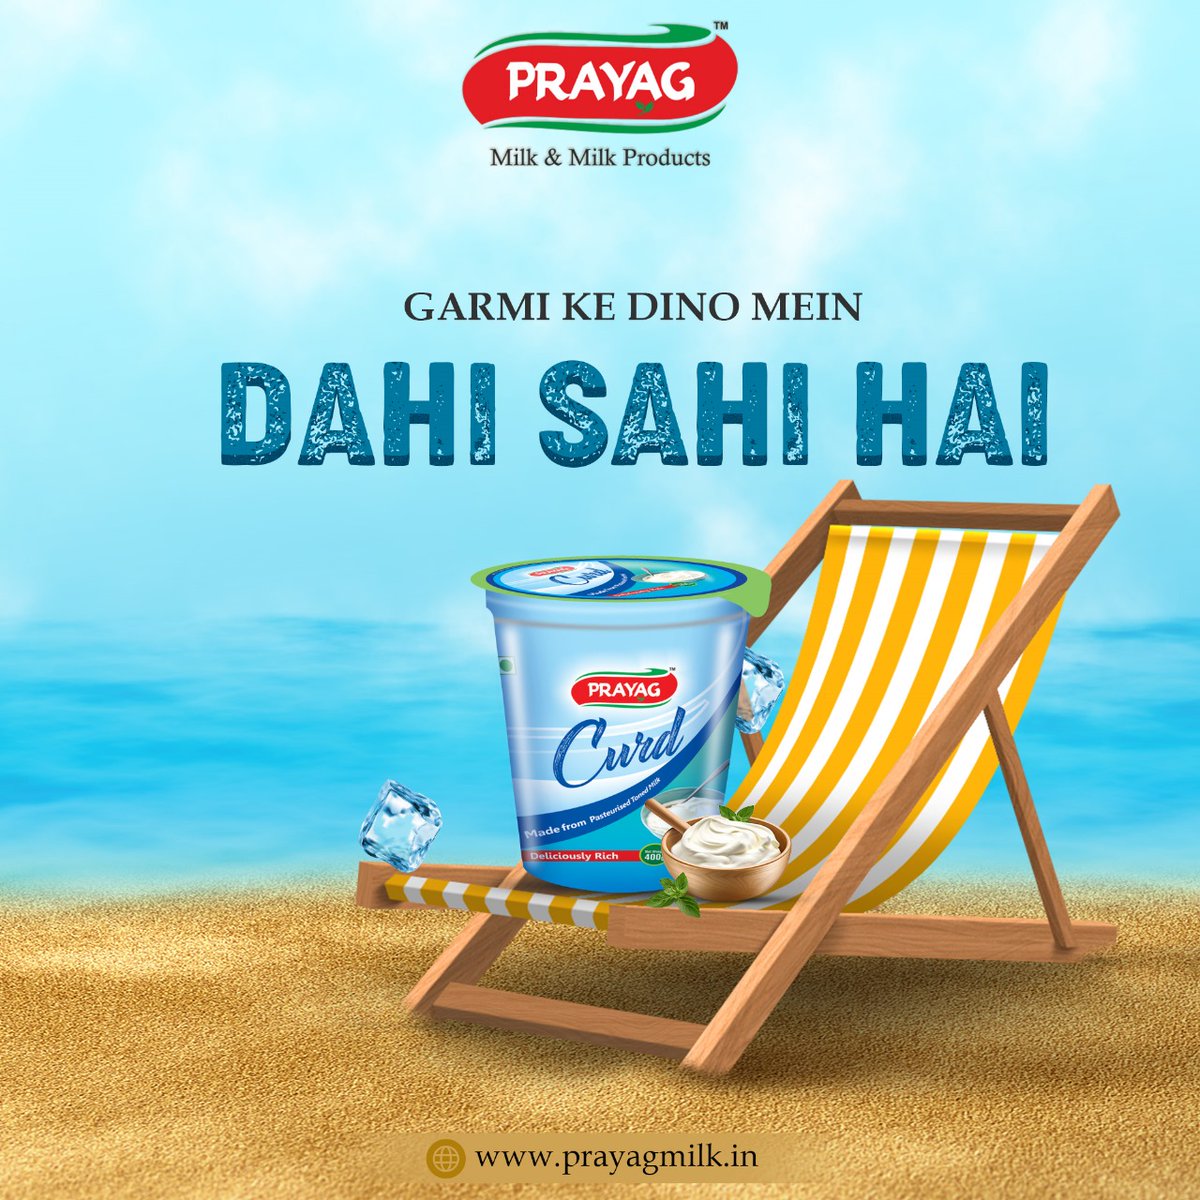 Beat the summer heat with a spoonful of goodness! Prayag Milk's refreshing Dahi is the perfect companion for scorching days☀️Cool, creamy, and oh-so-delicious, it's the ultimate way to stay refreshed and rejuvenated. 
#curd #purecurd #DahiSahiHai #SummerVibes #PrayagmilkBareilly